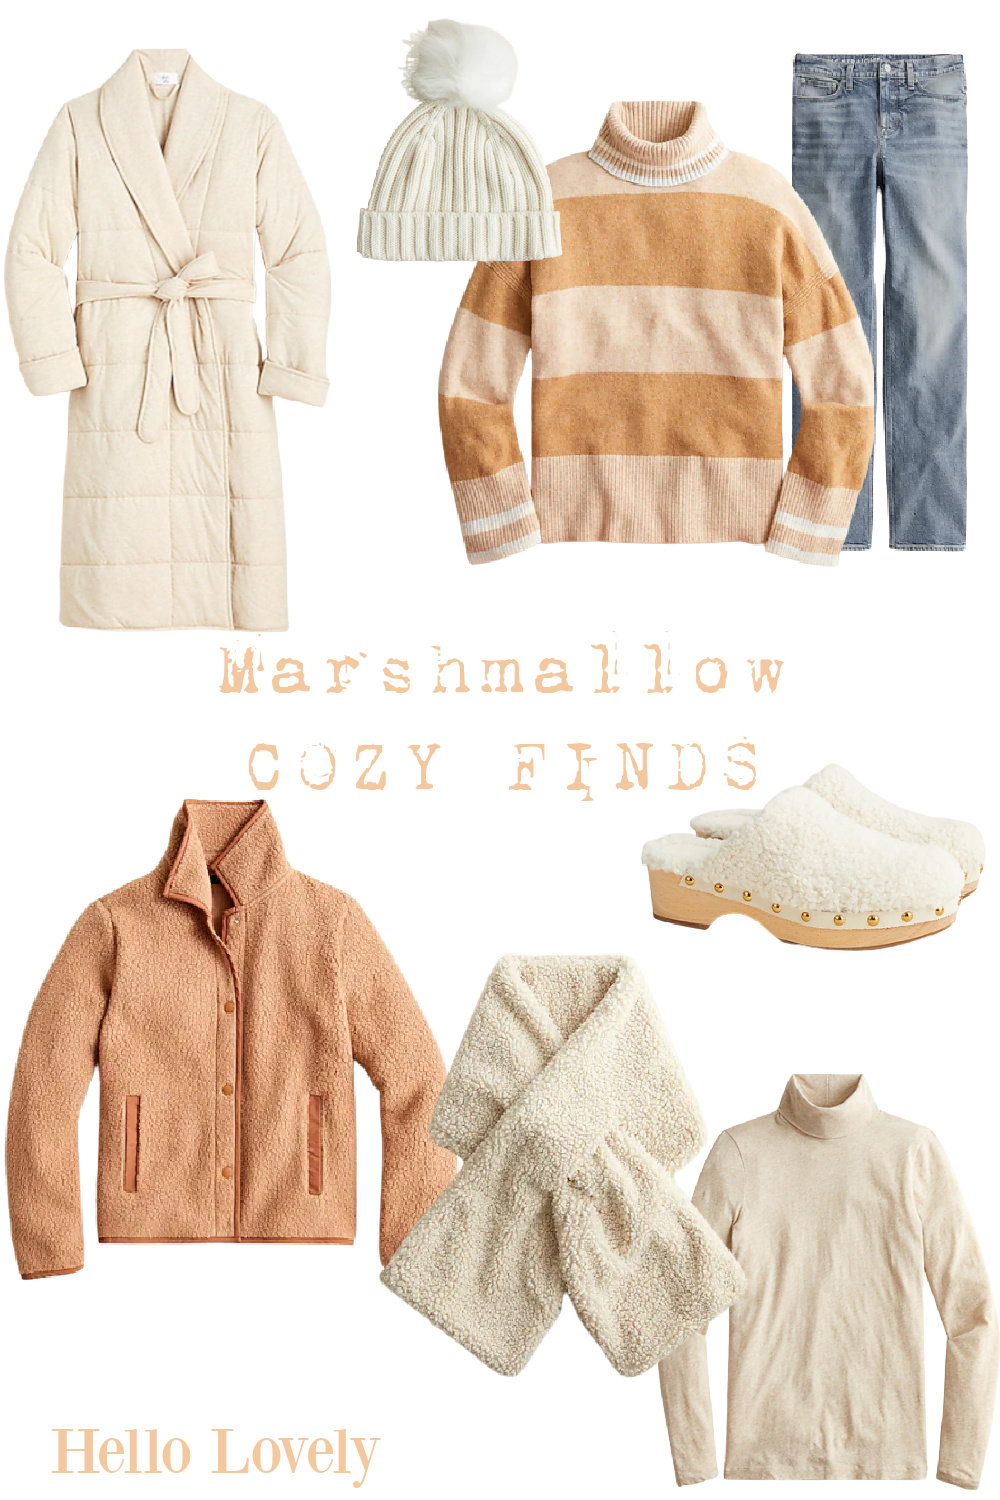 Marshmallow Cozy Finds: fuzzy wuzzy comfort for you from J. Crew on Hello Lovely.